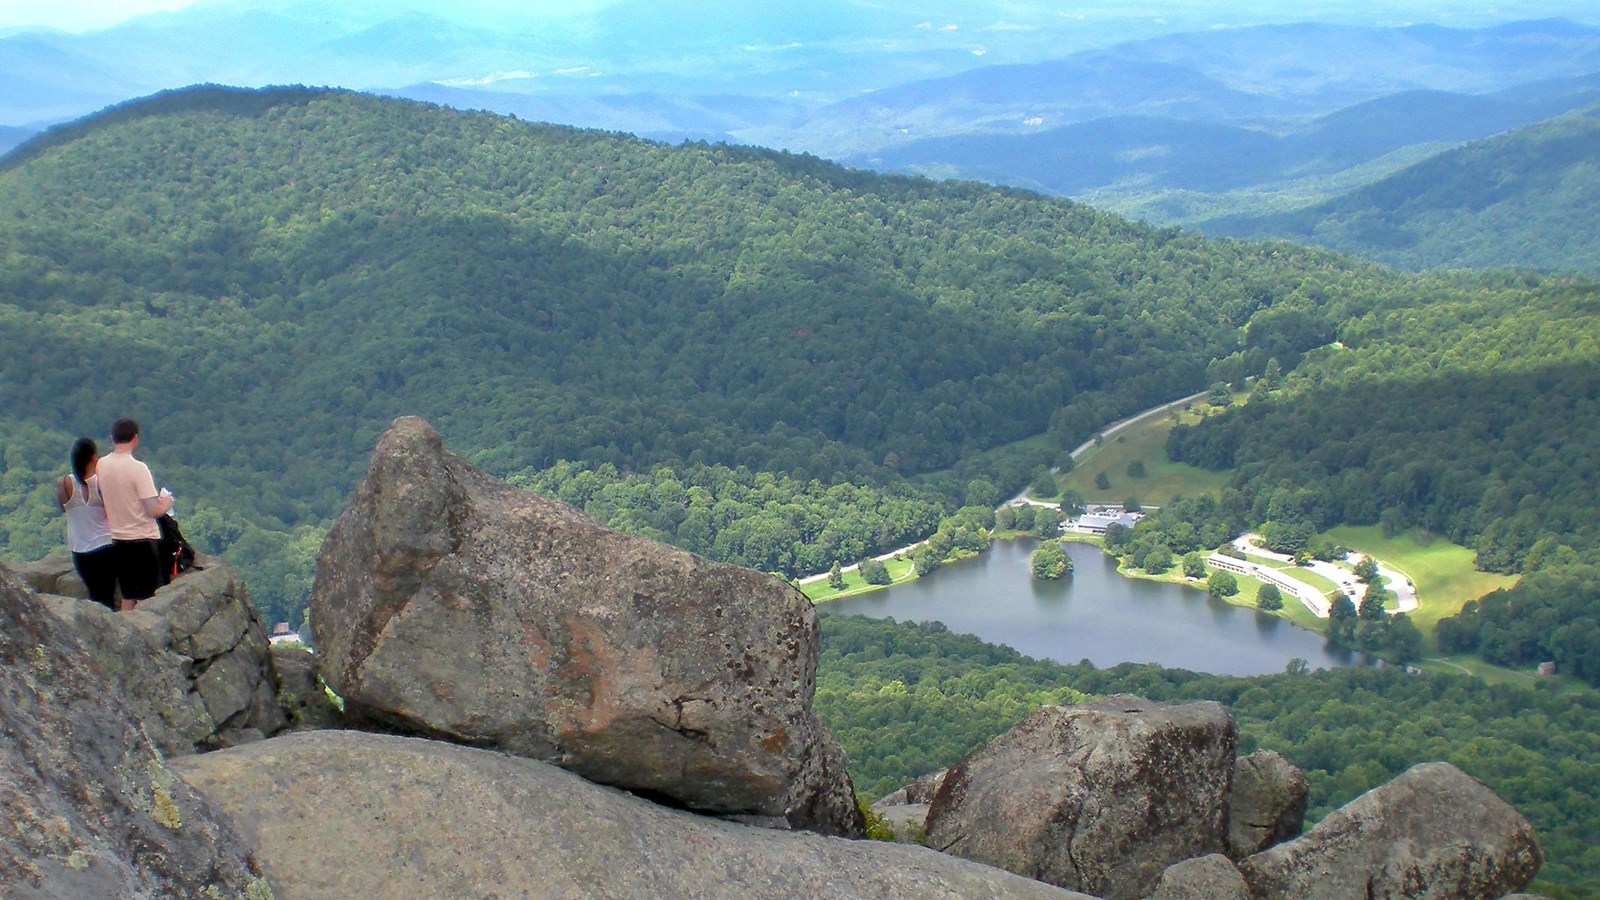 Two hikes stand among large boulders on a high peak, with a small lake and logde in the valley below